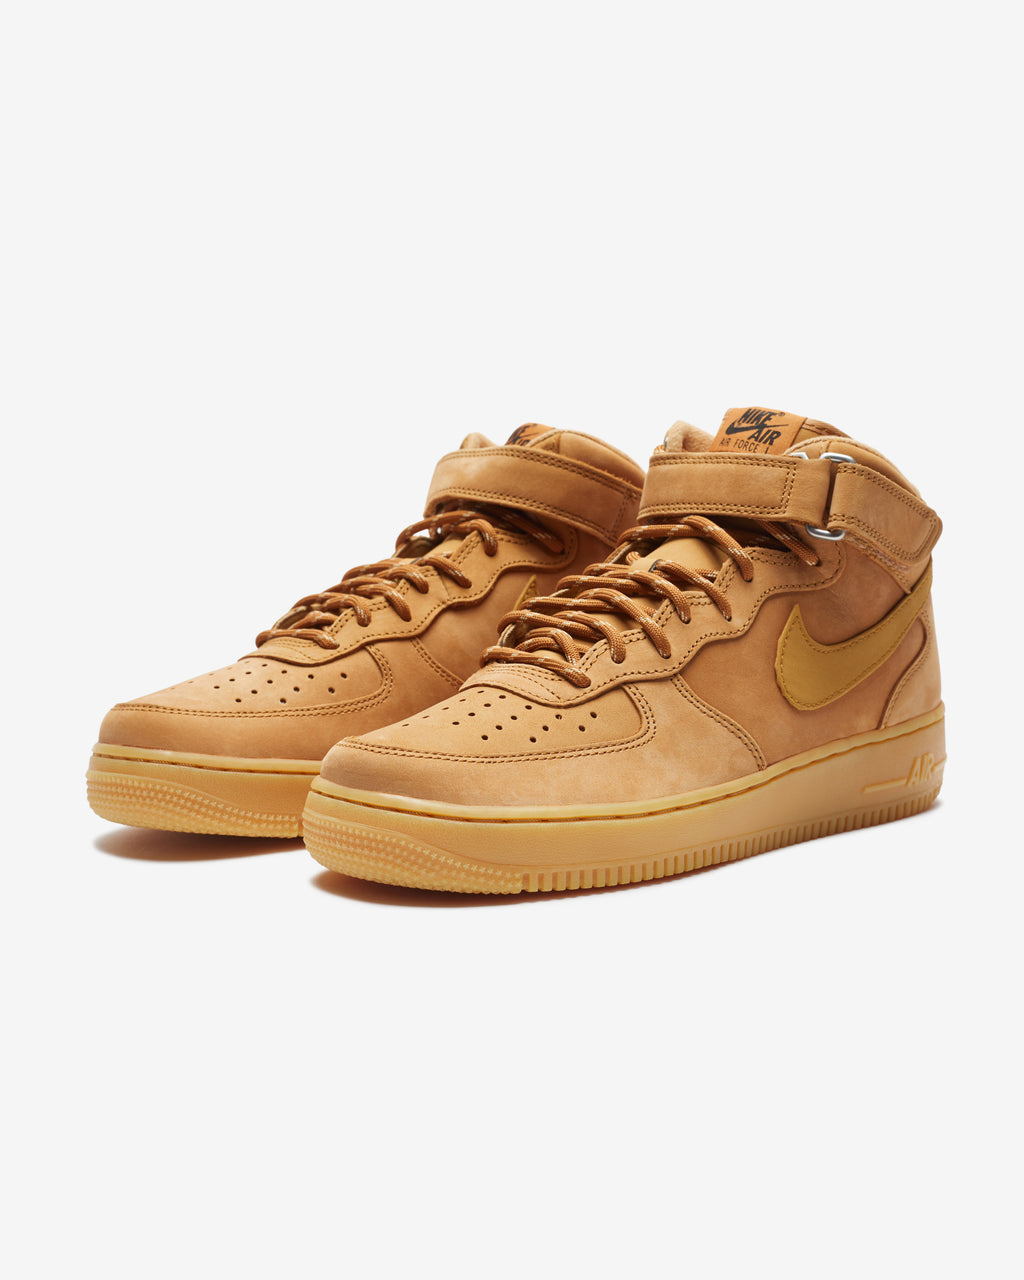 NIKE PS FORCE 1 LV8 3 - WHEAT/ GUMLIGHTBROWN – Undefeated